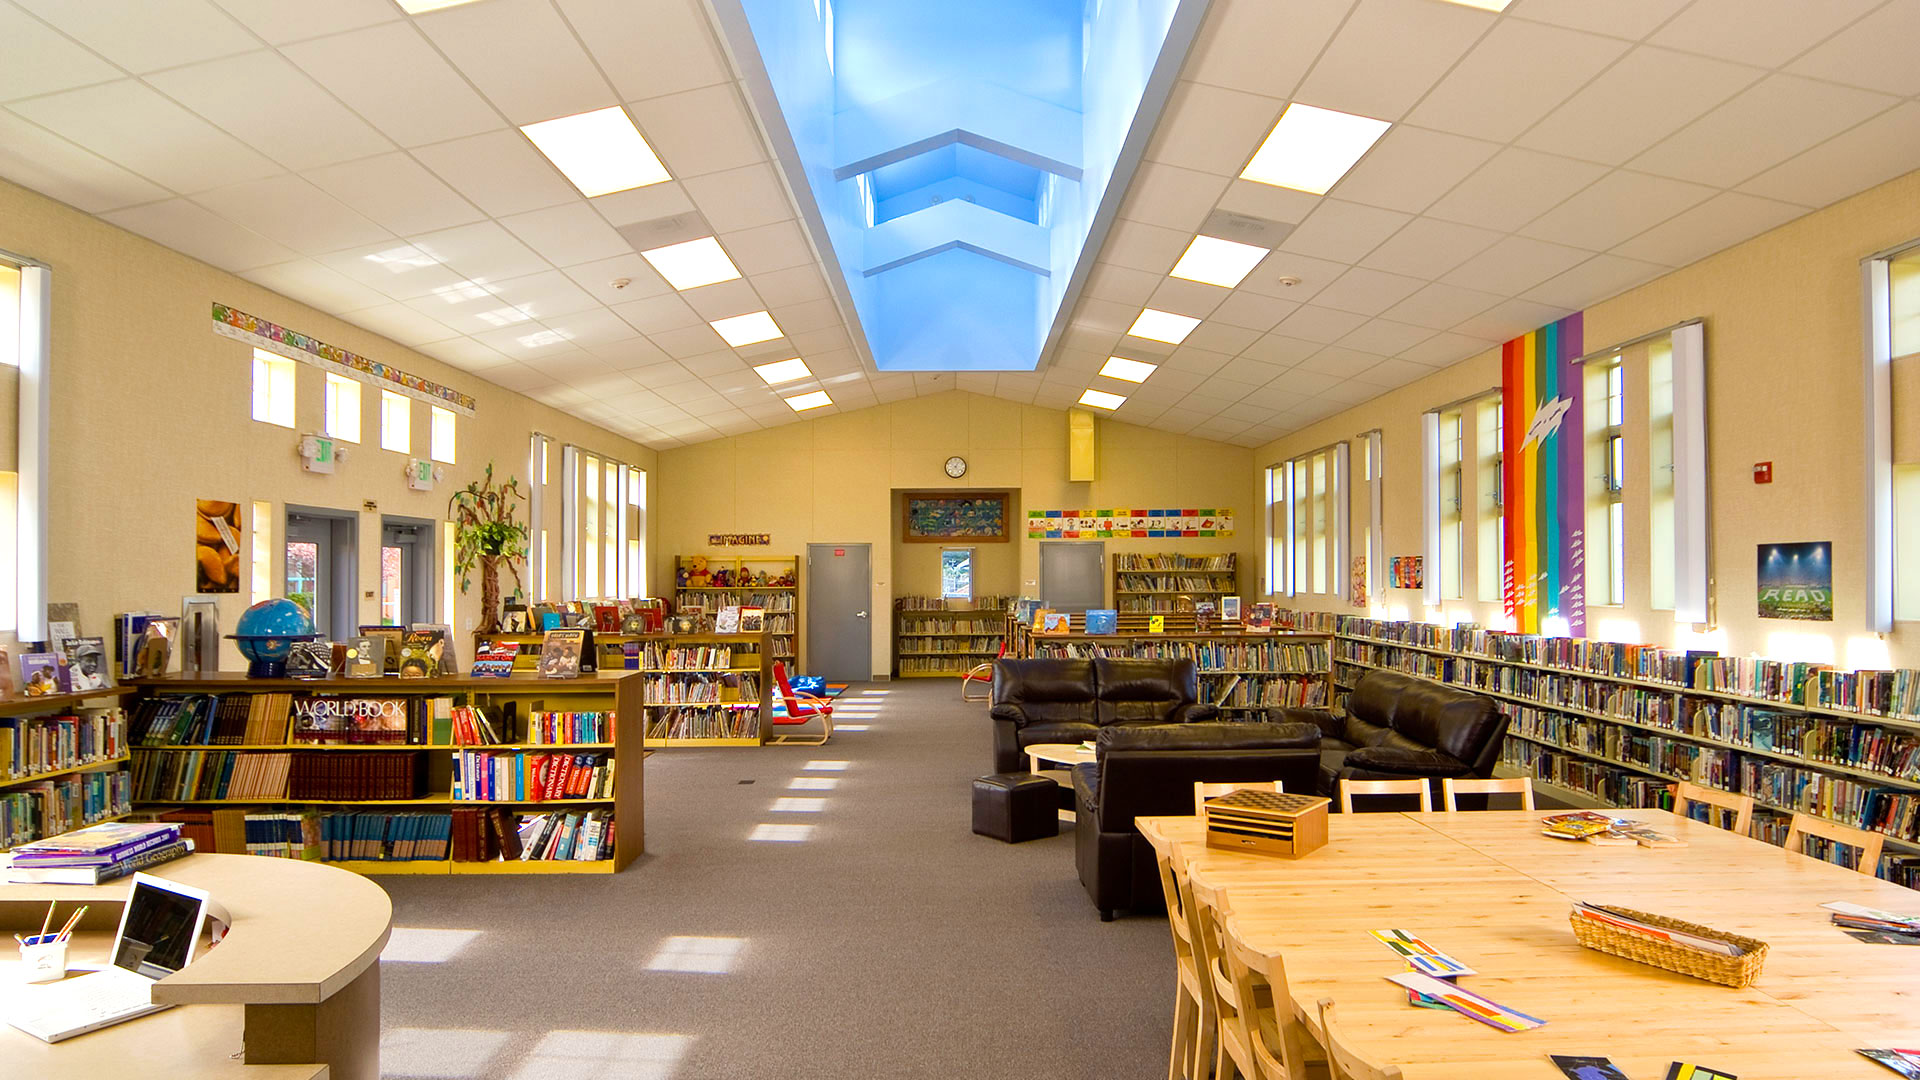 Library interior, looking across the building. Cushioned seating across from bookshelves and blue monitor above.